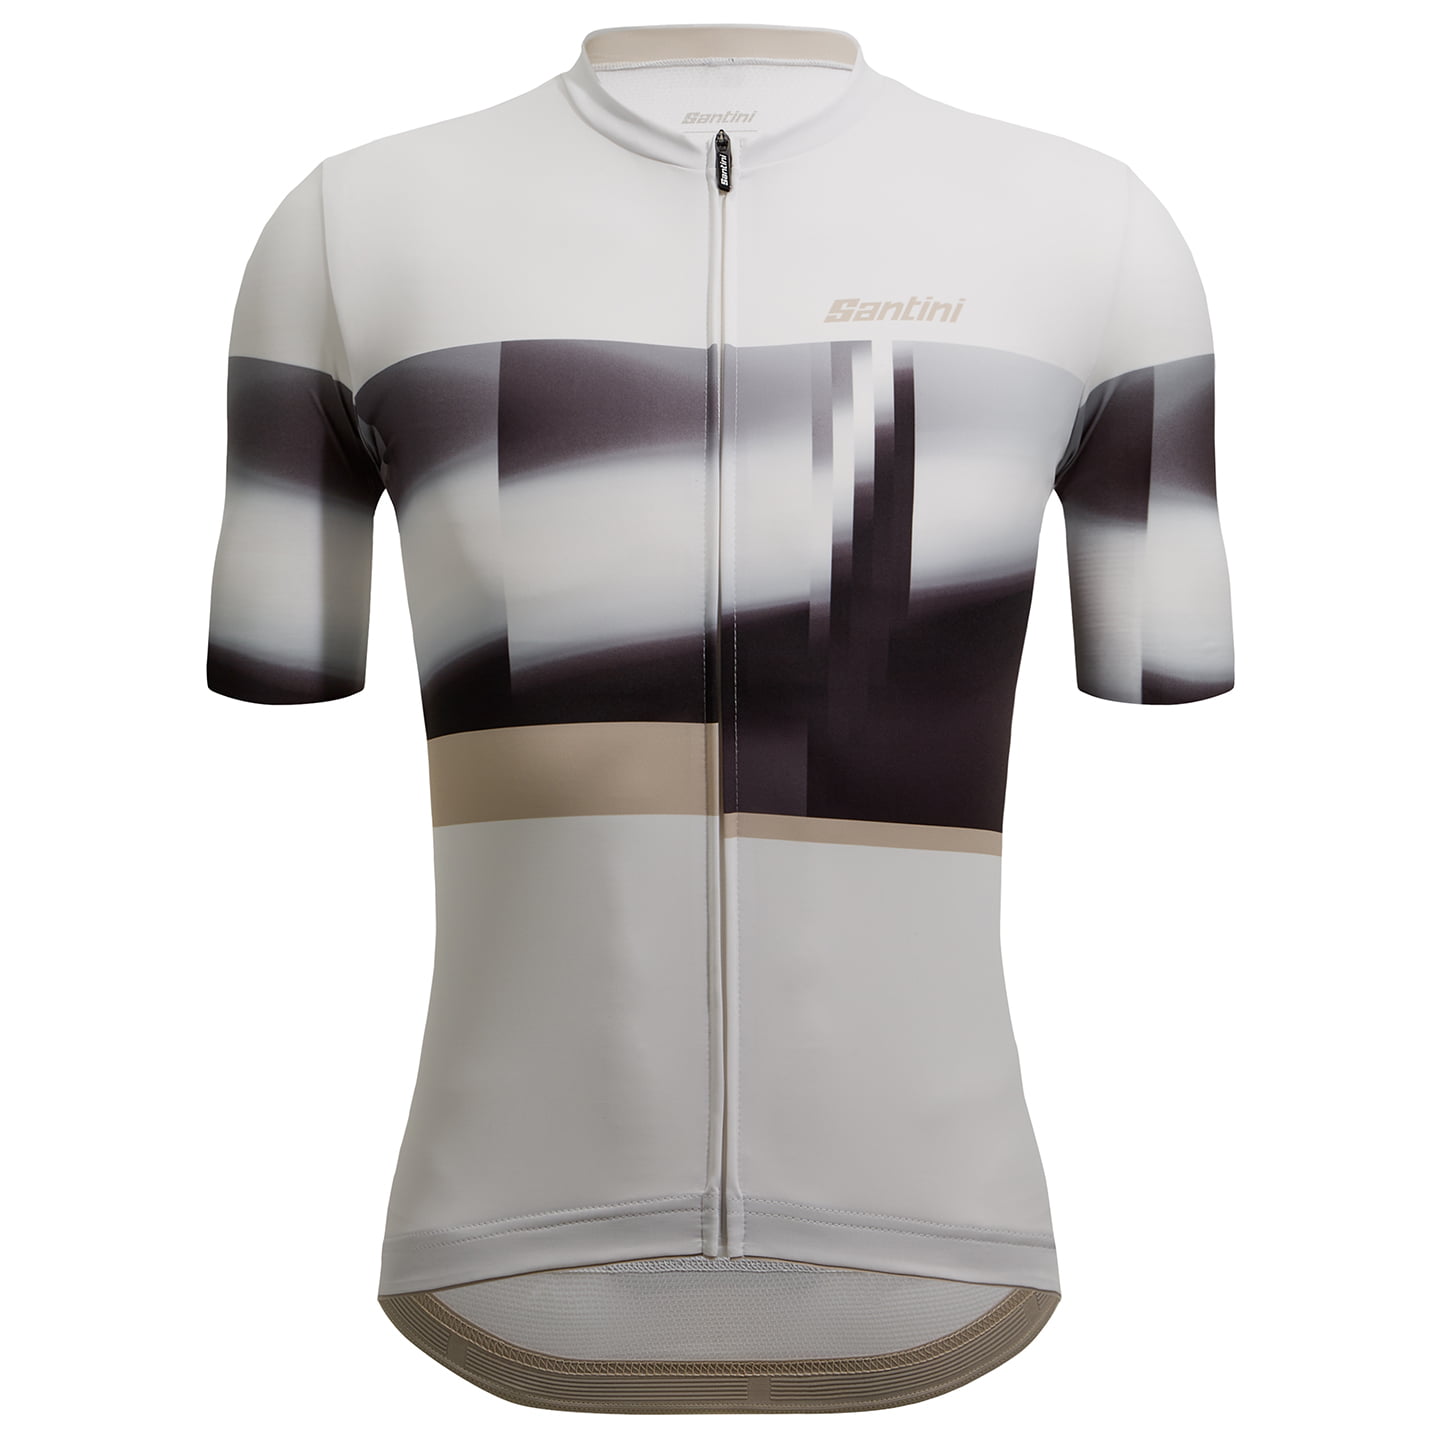 SANTINI Mirage Short Sleeve Jersey Short Sleeve Jersey, for men, size 2XL, Cycling jersey, Cycle clothing